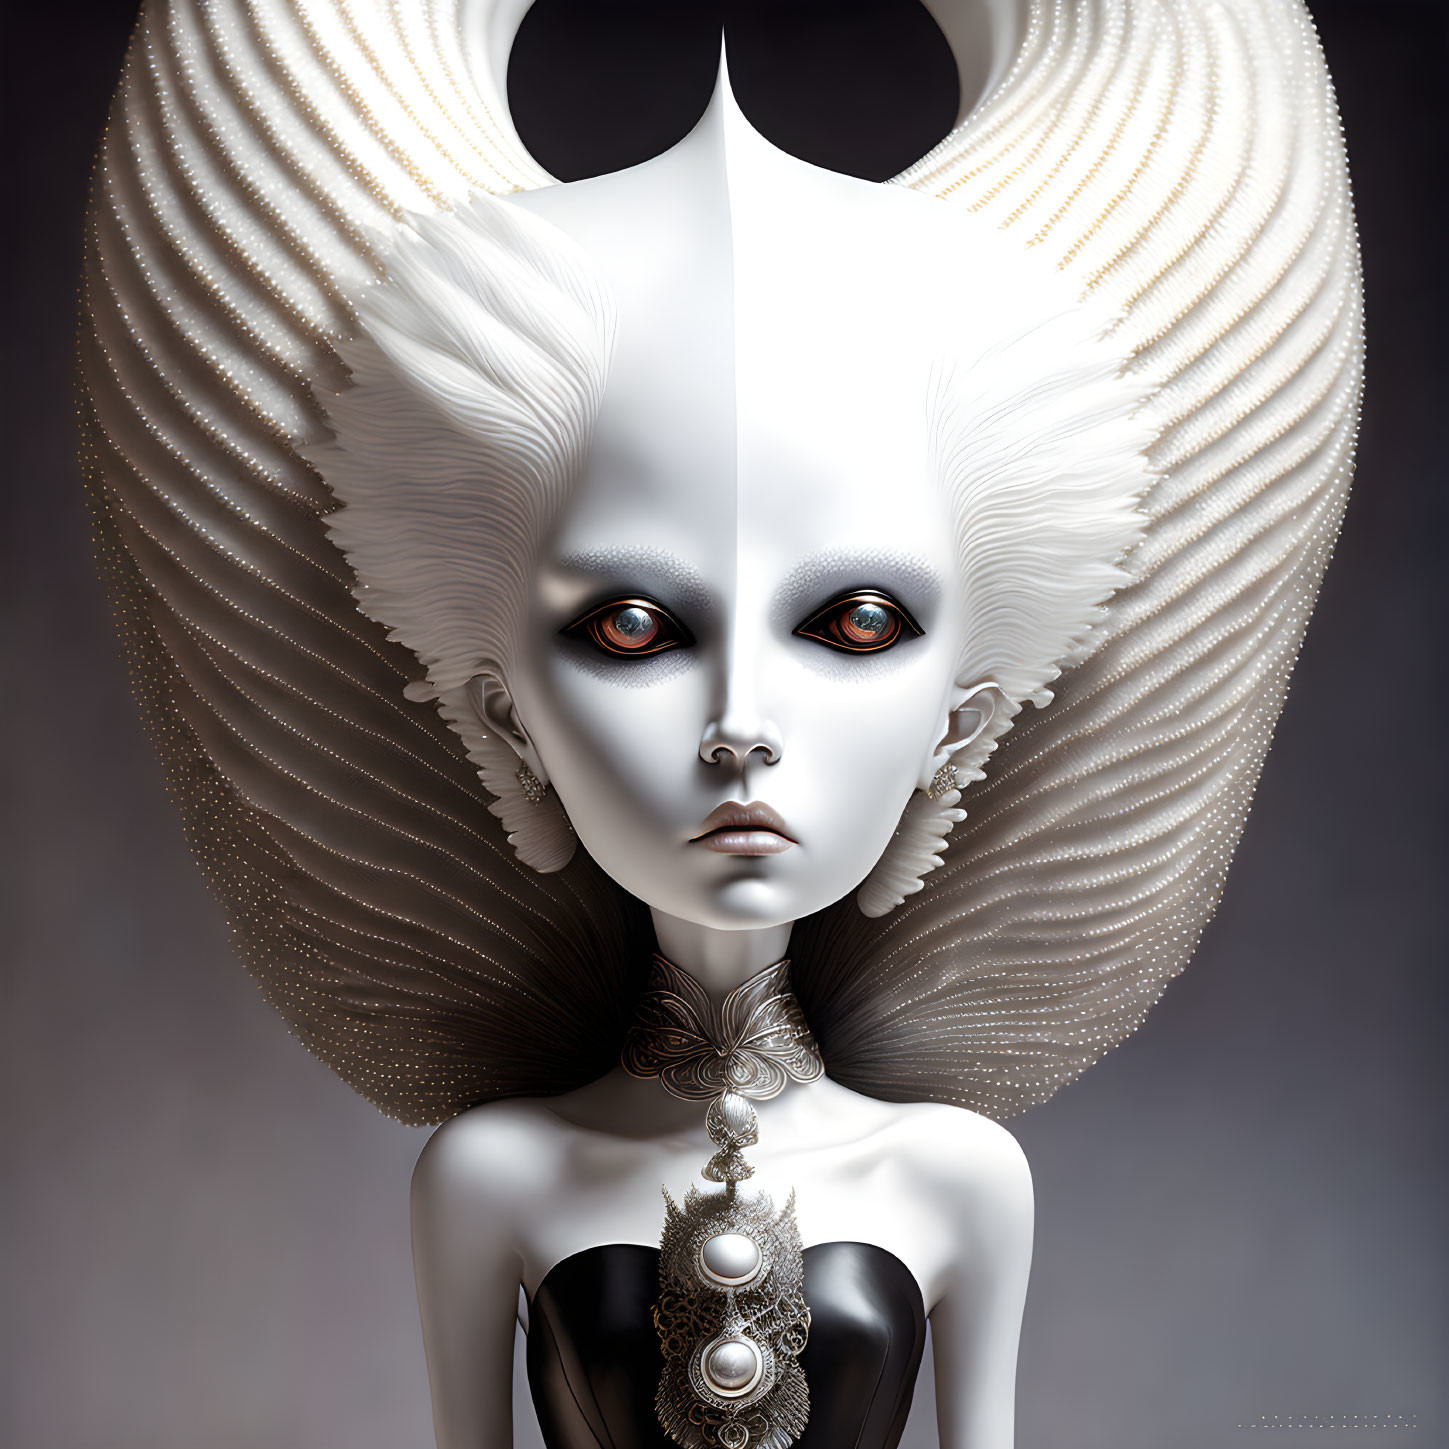 Surreal character with pale skin and ornate headdress